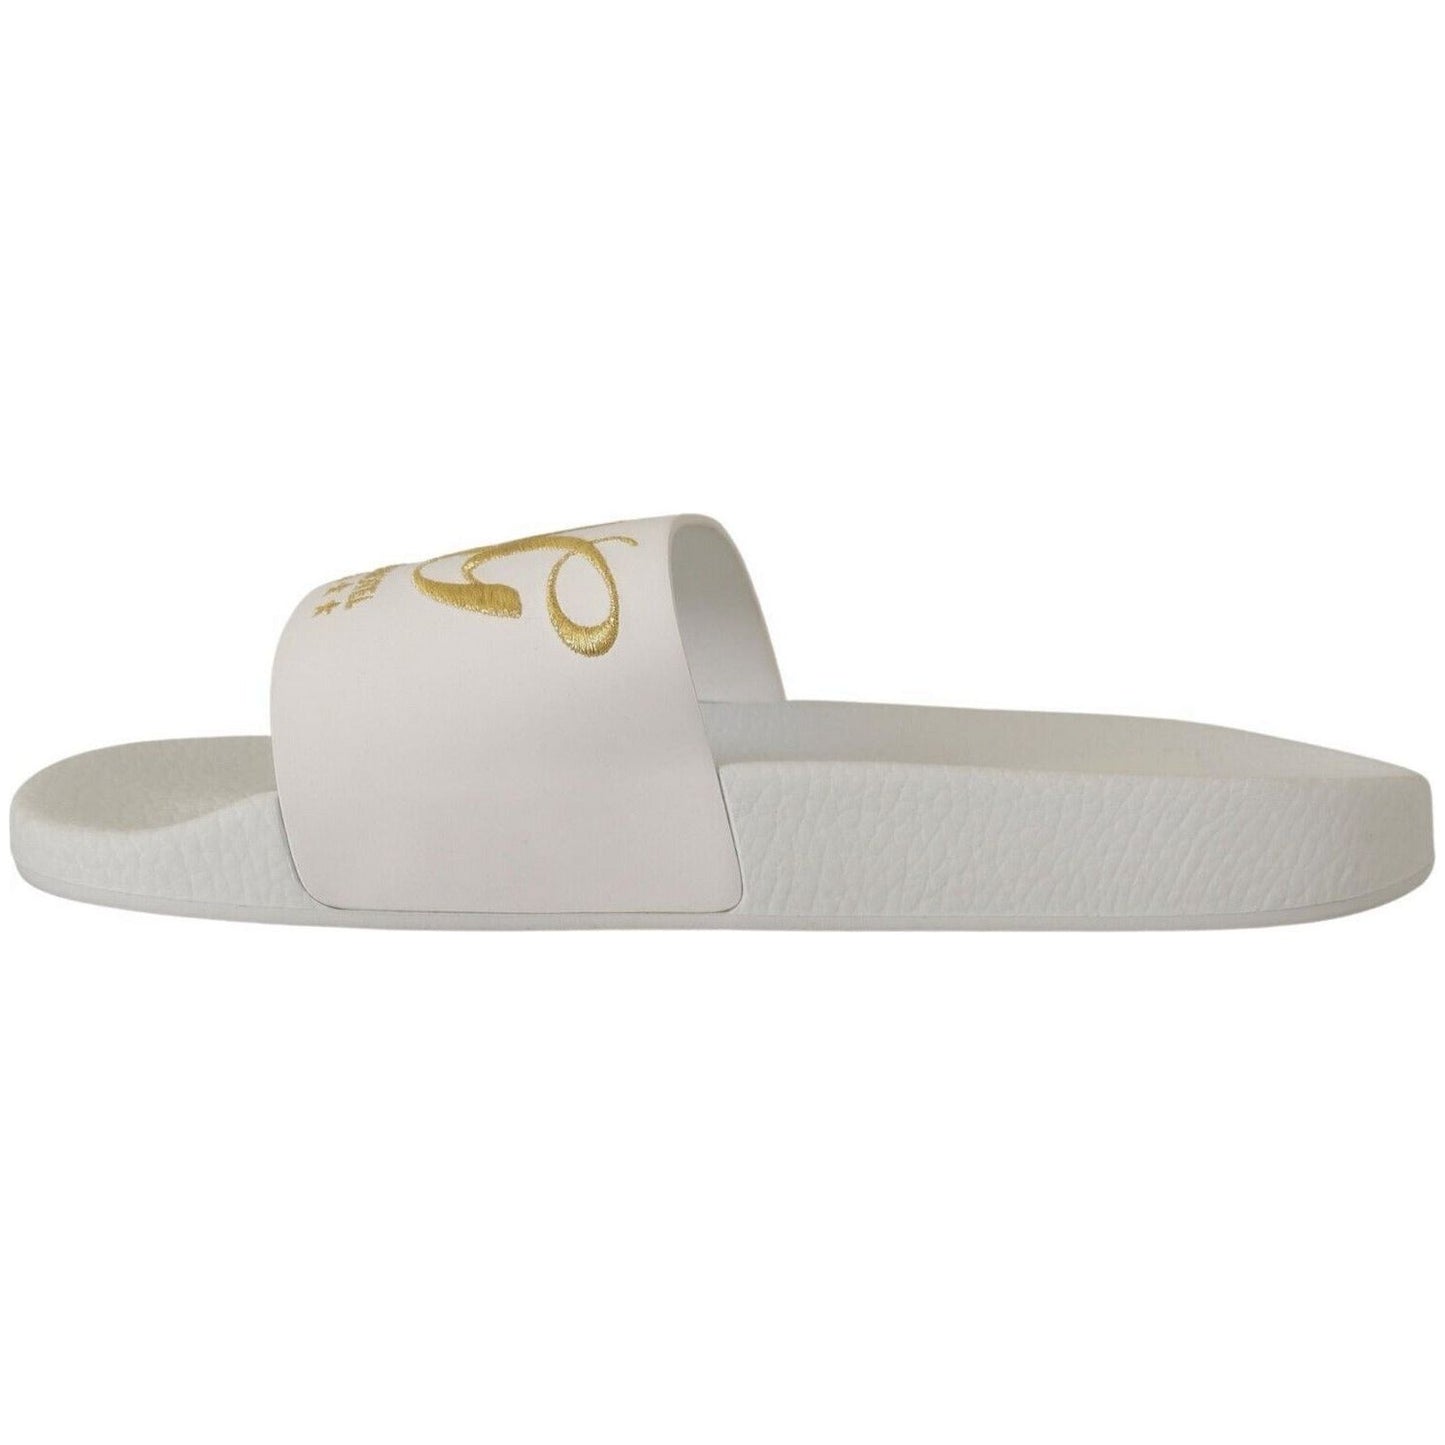 Dolce & Gabbana Chic White Leather Slides with Gold Embroidery white-leather-luxury-hotel-slides-sandals-shoes